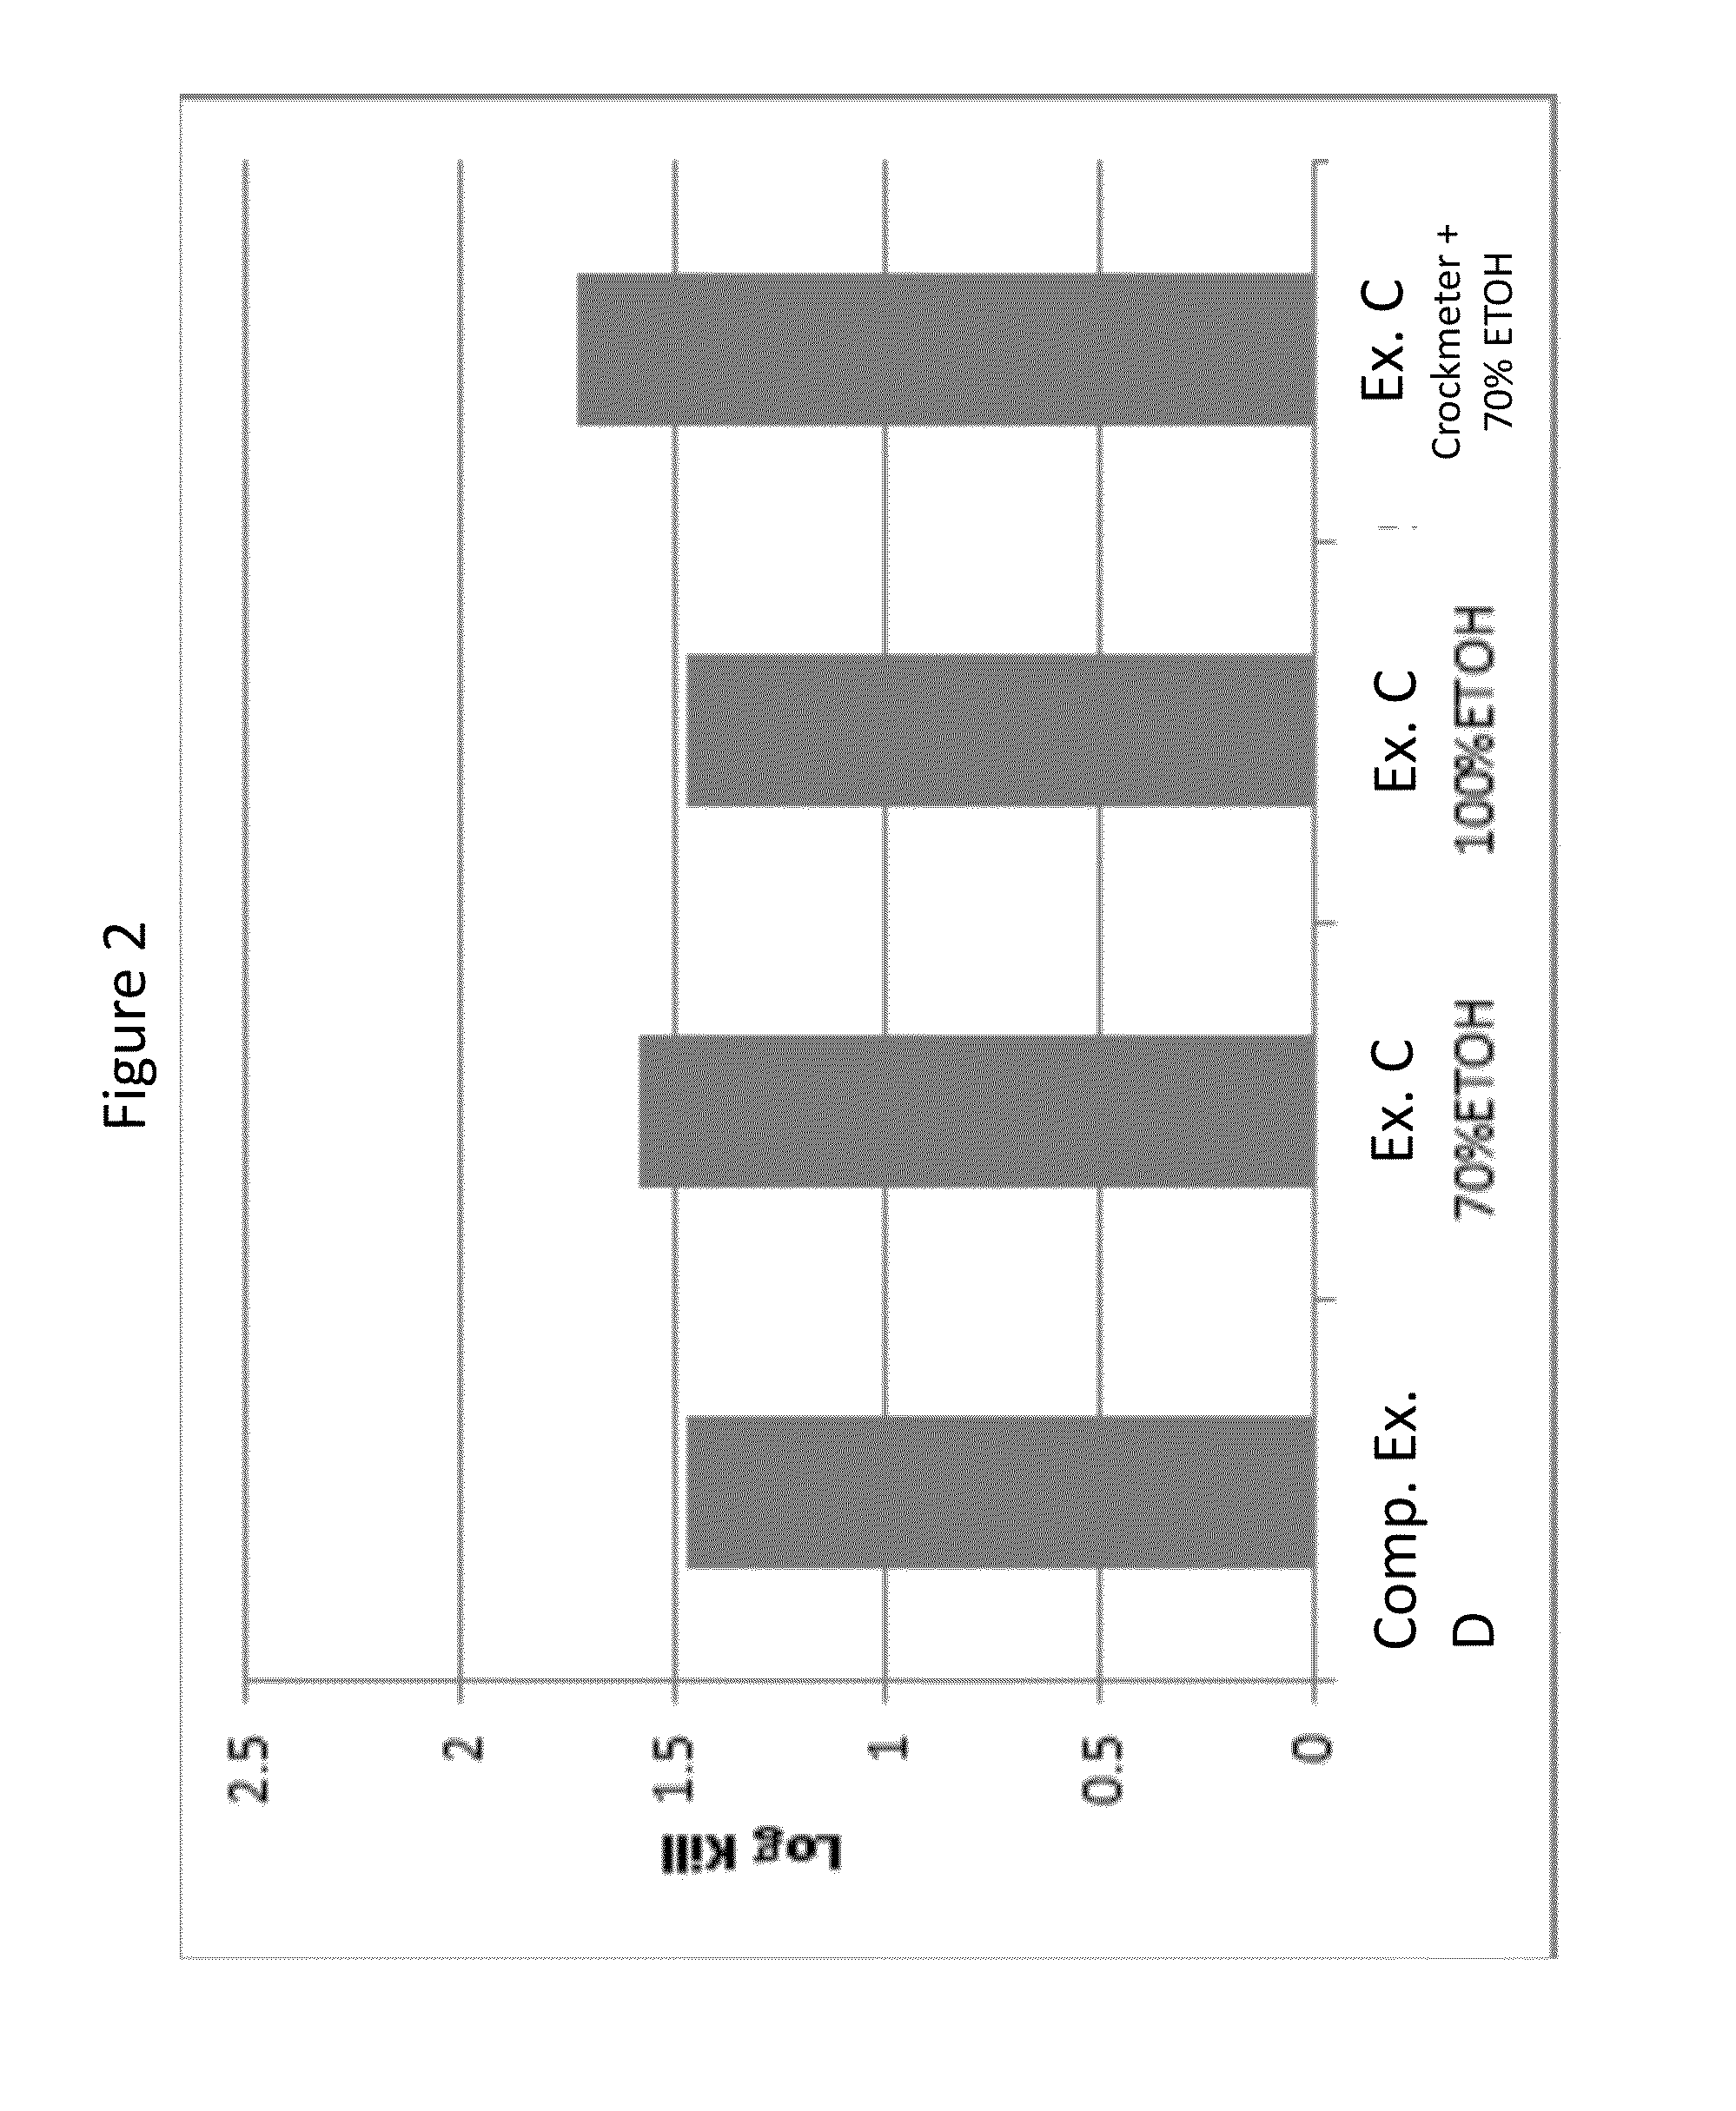 Antimicrobial Articles and Methods of Making and Using Same